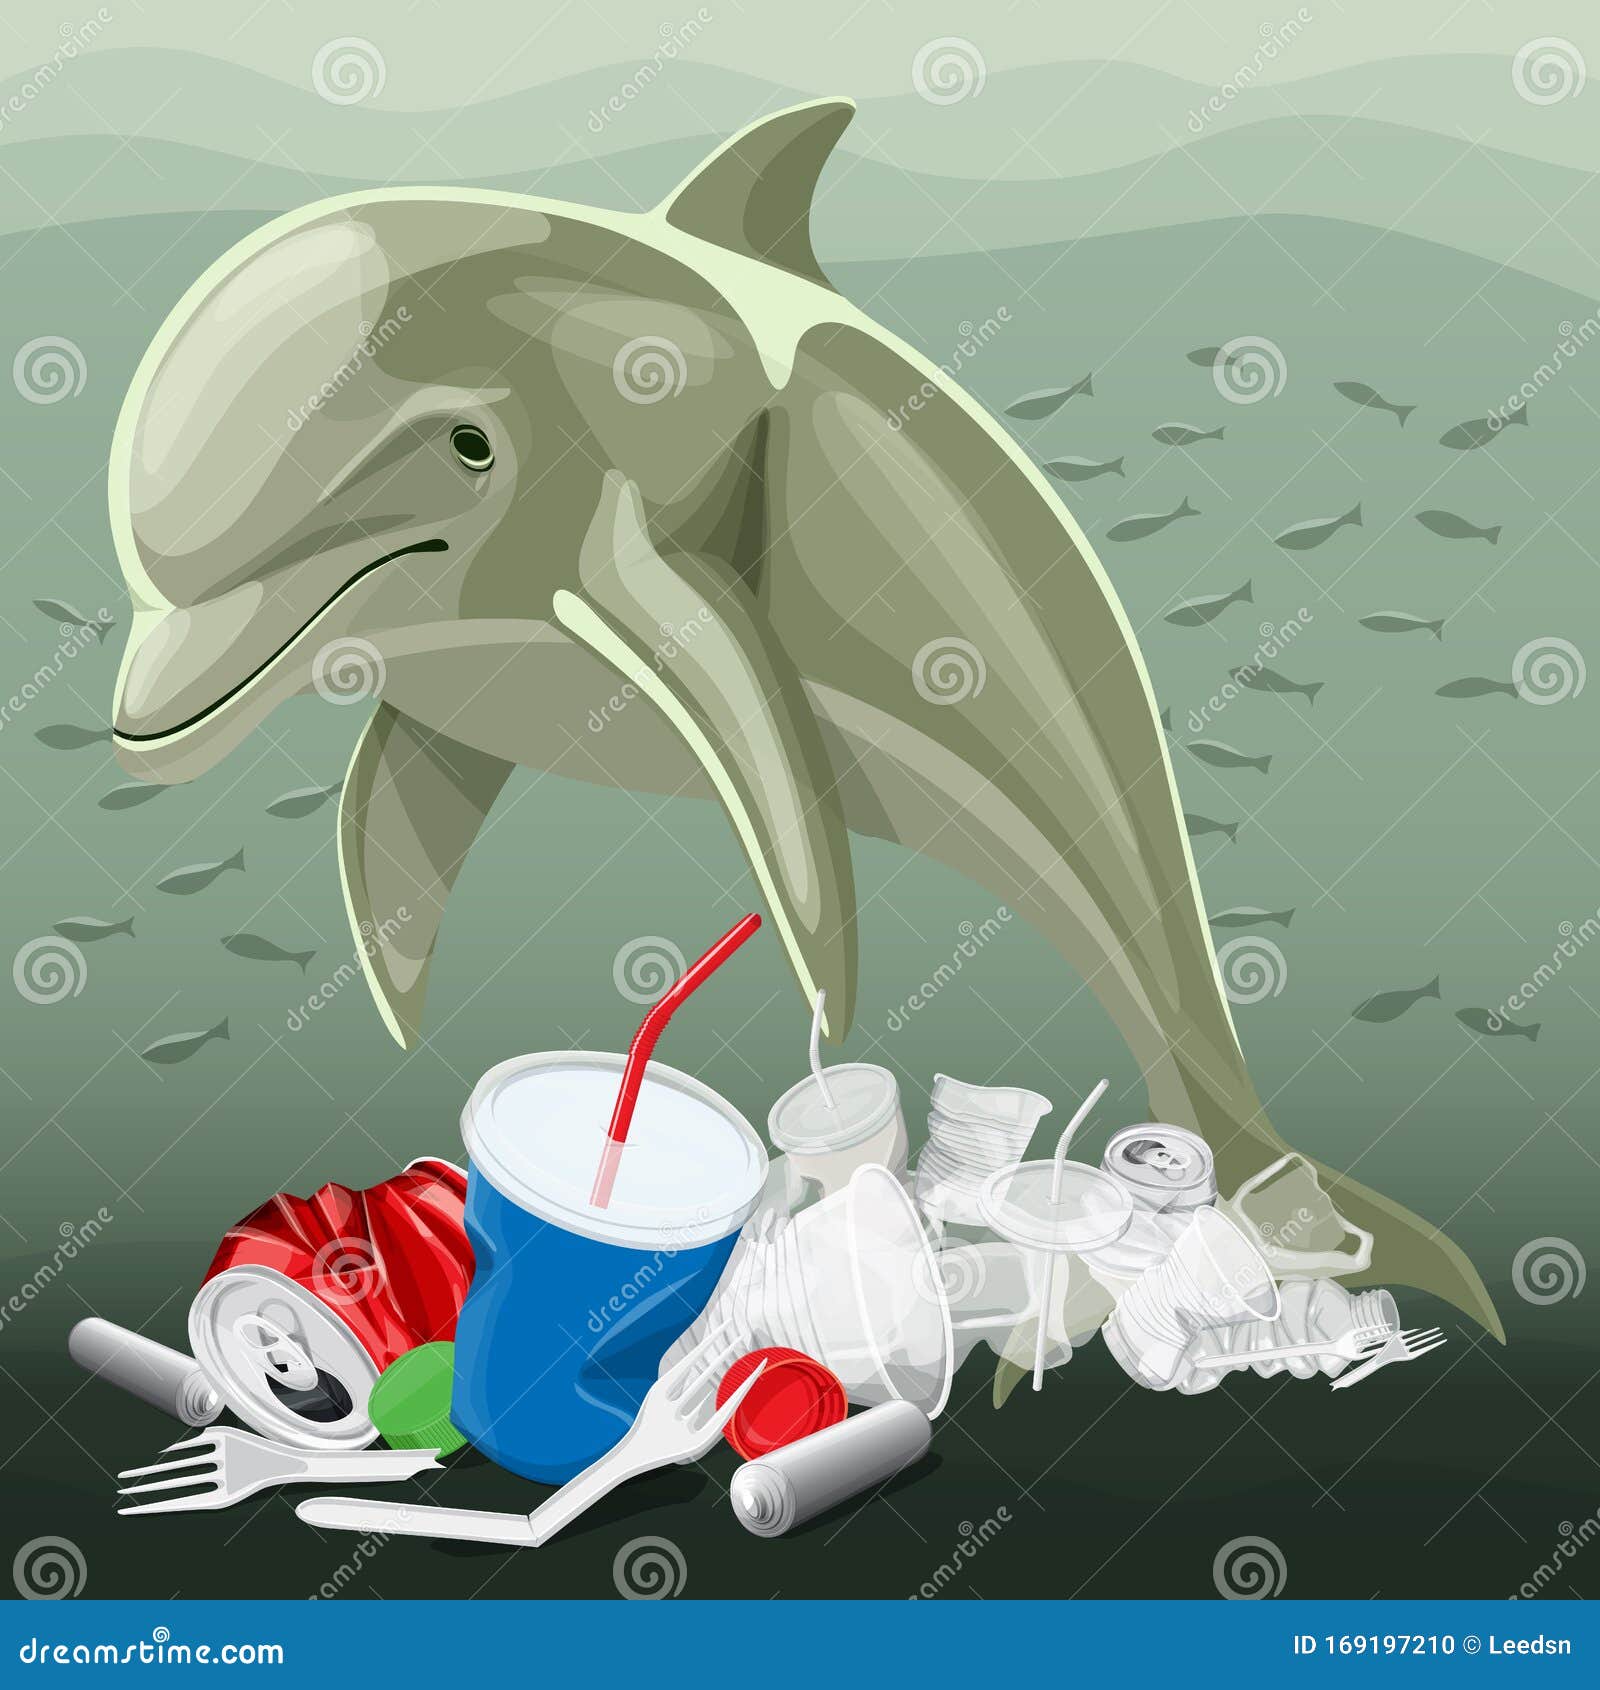 Environment Pollution Illustration and Dolphin Stock Vector ...